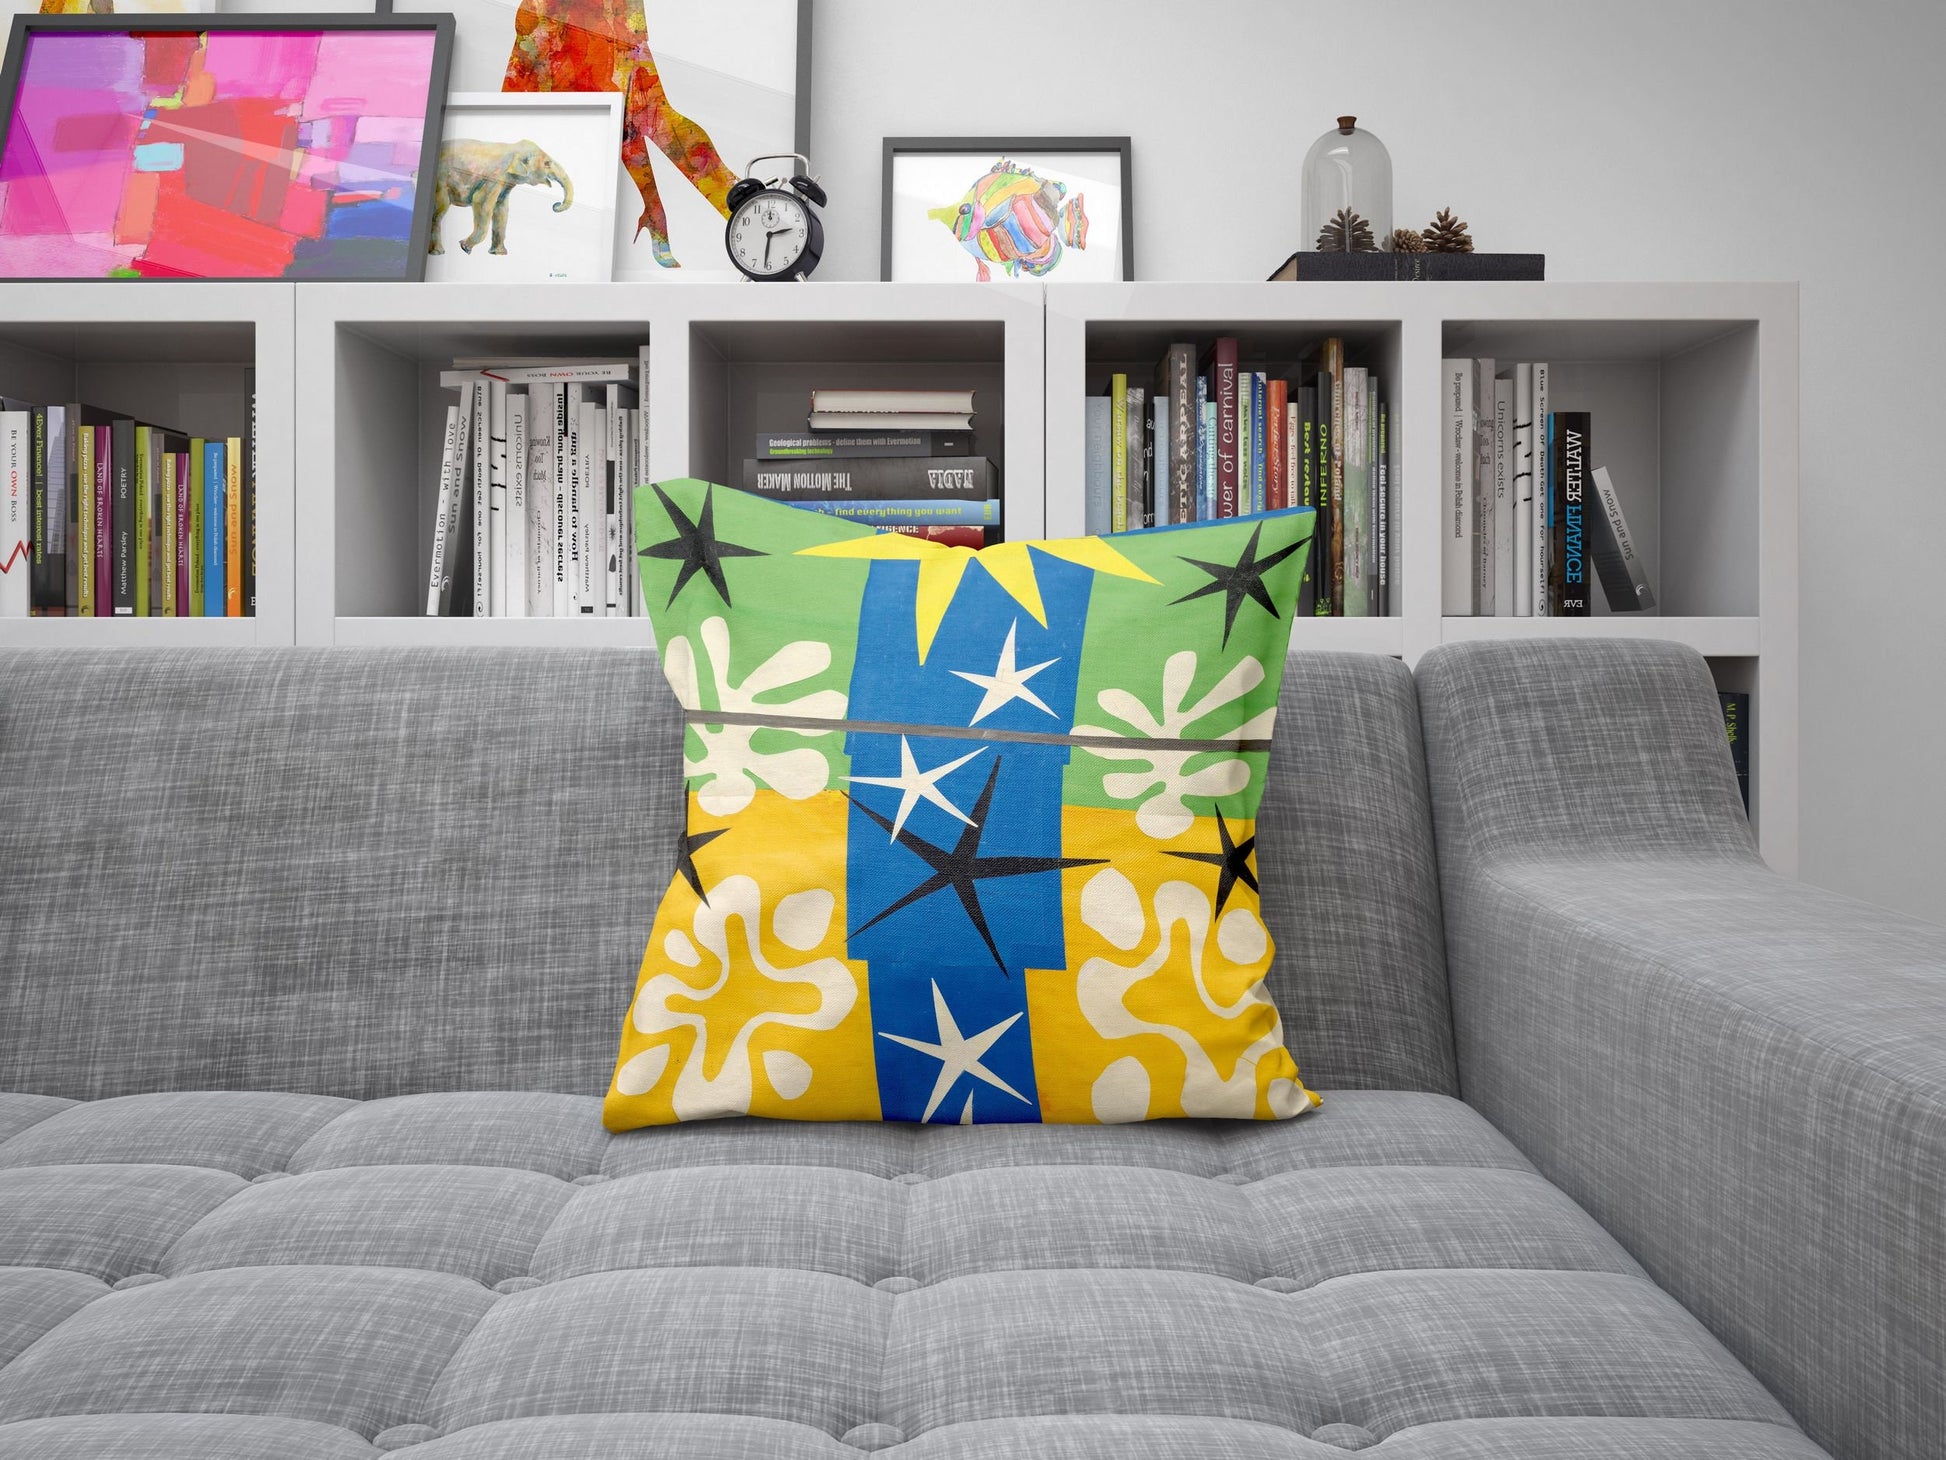 Henri Matisse Famous Painting, Decorative Pillow, Abstract Throw Pillow Cover, Designer Pillow, Colorful Pillow Case, 18 X 18 Pillow Covers